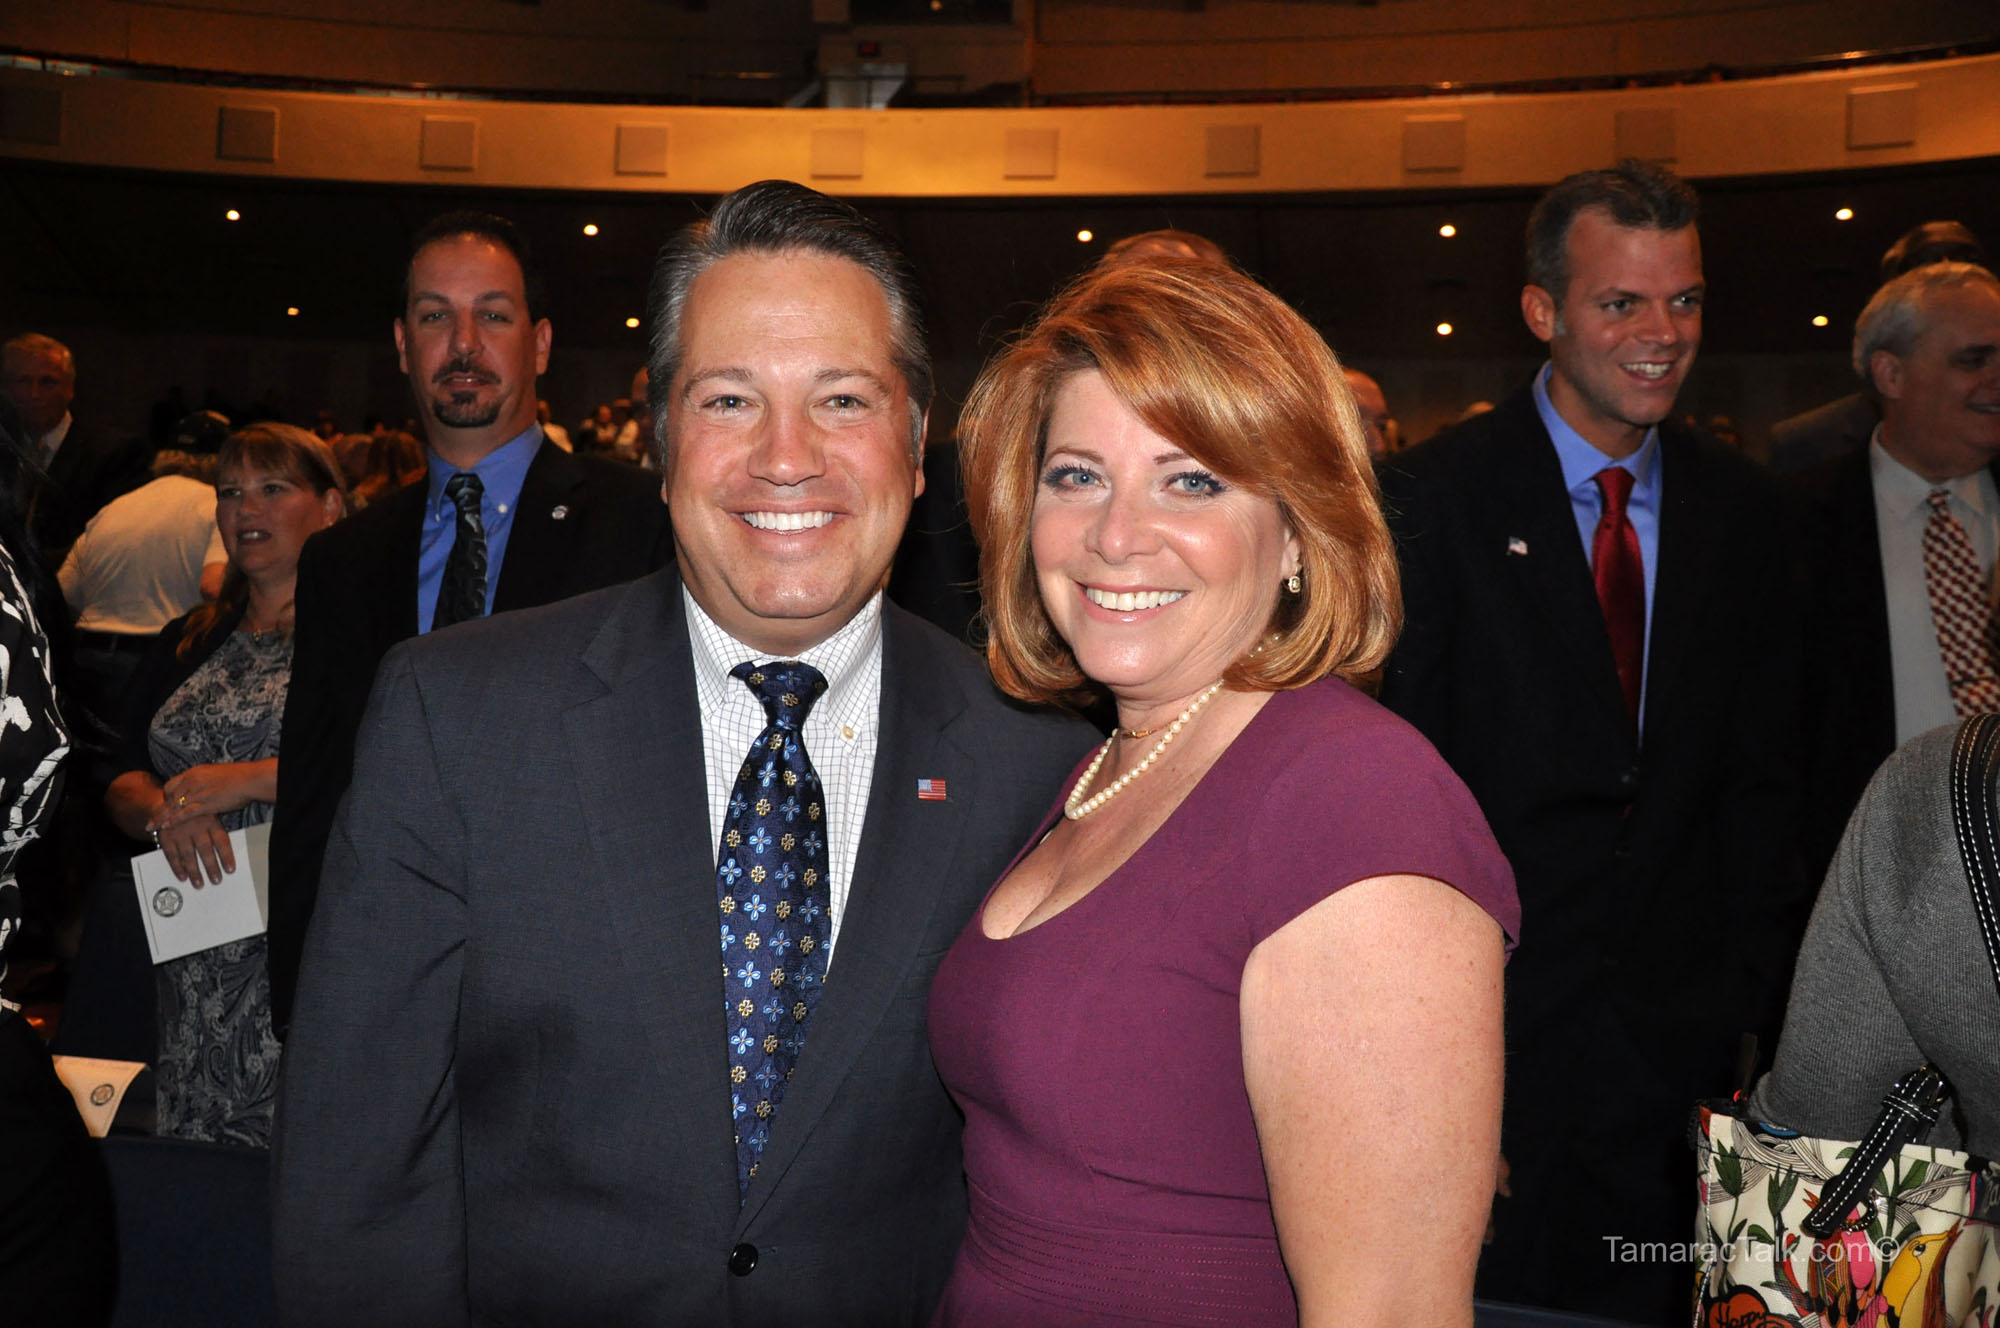 County Commissioners Stacy Ritter and Chip LaMarca